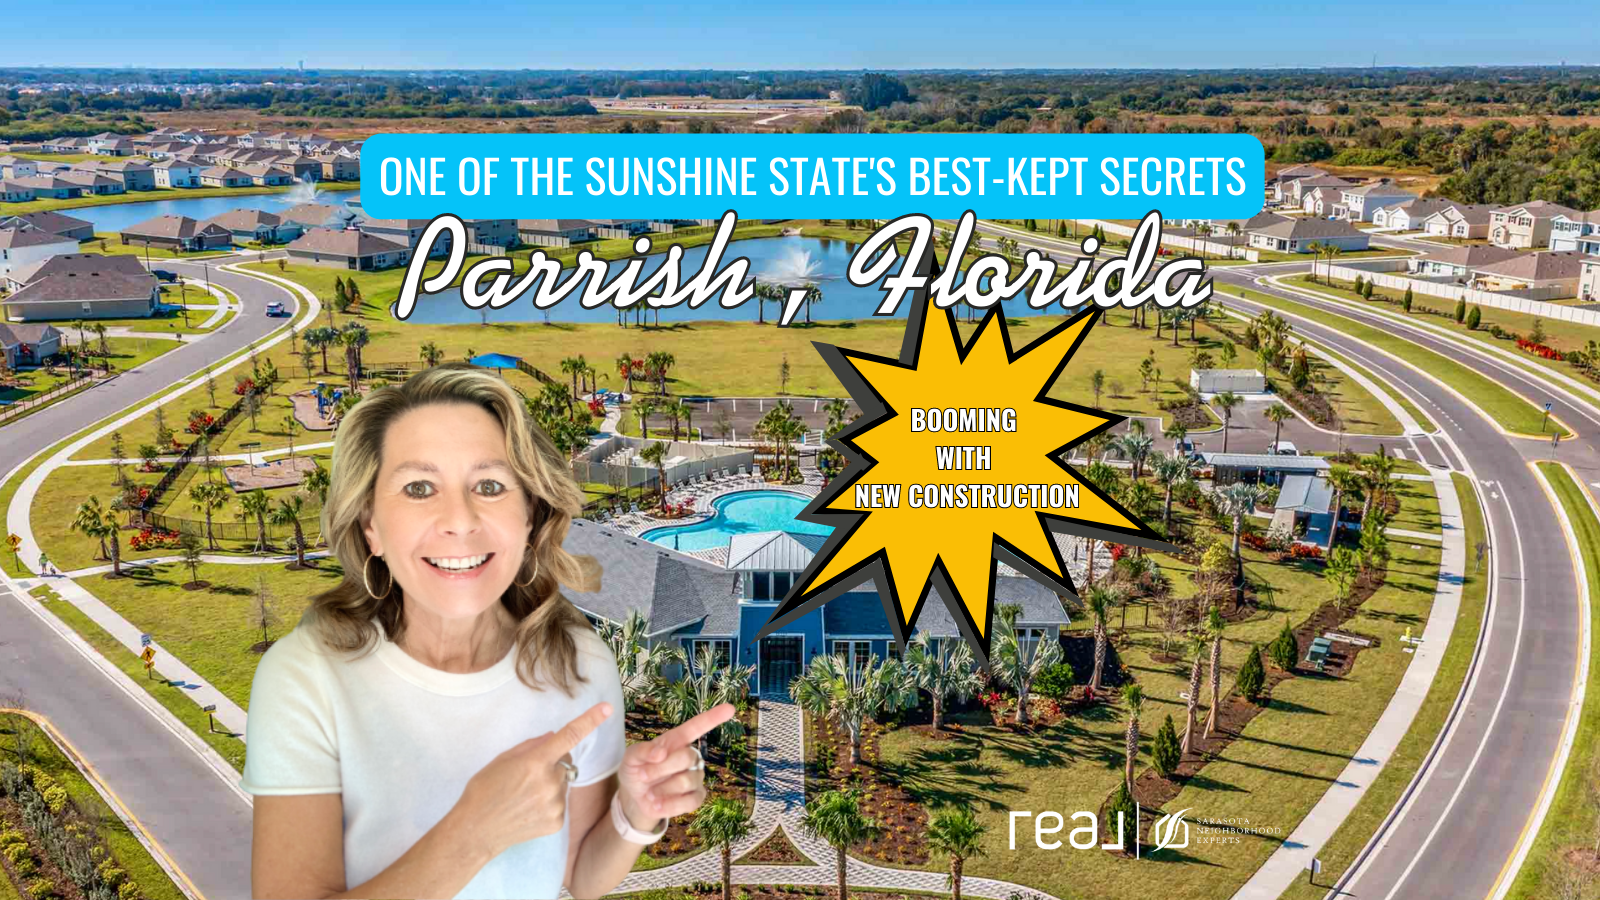 Parrish Realtor pointing our that Parrish Florida is booming with new construction